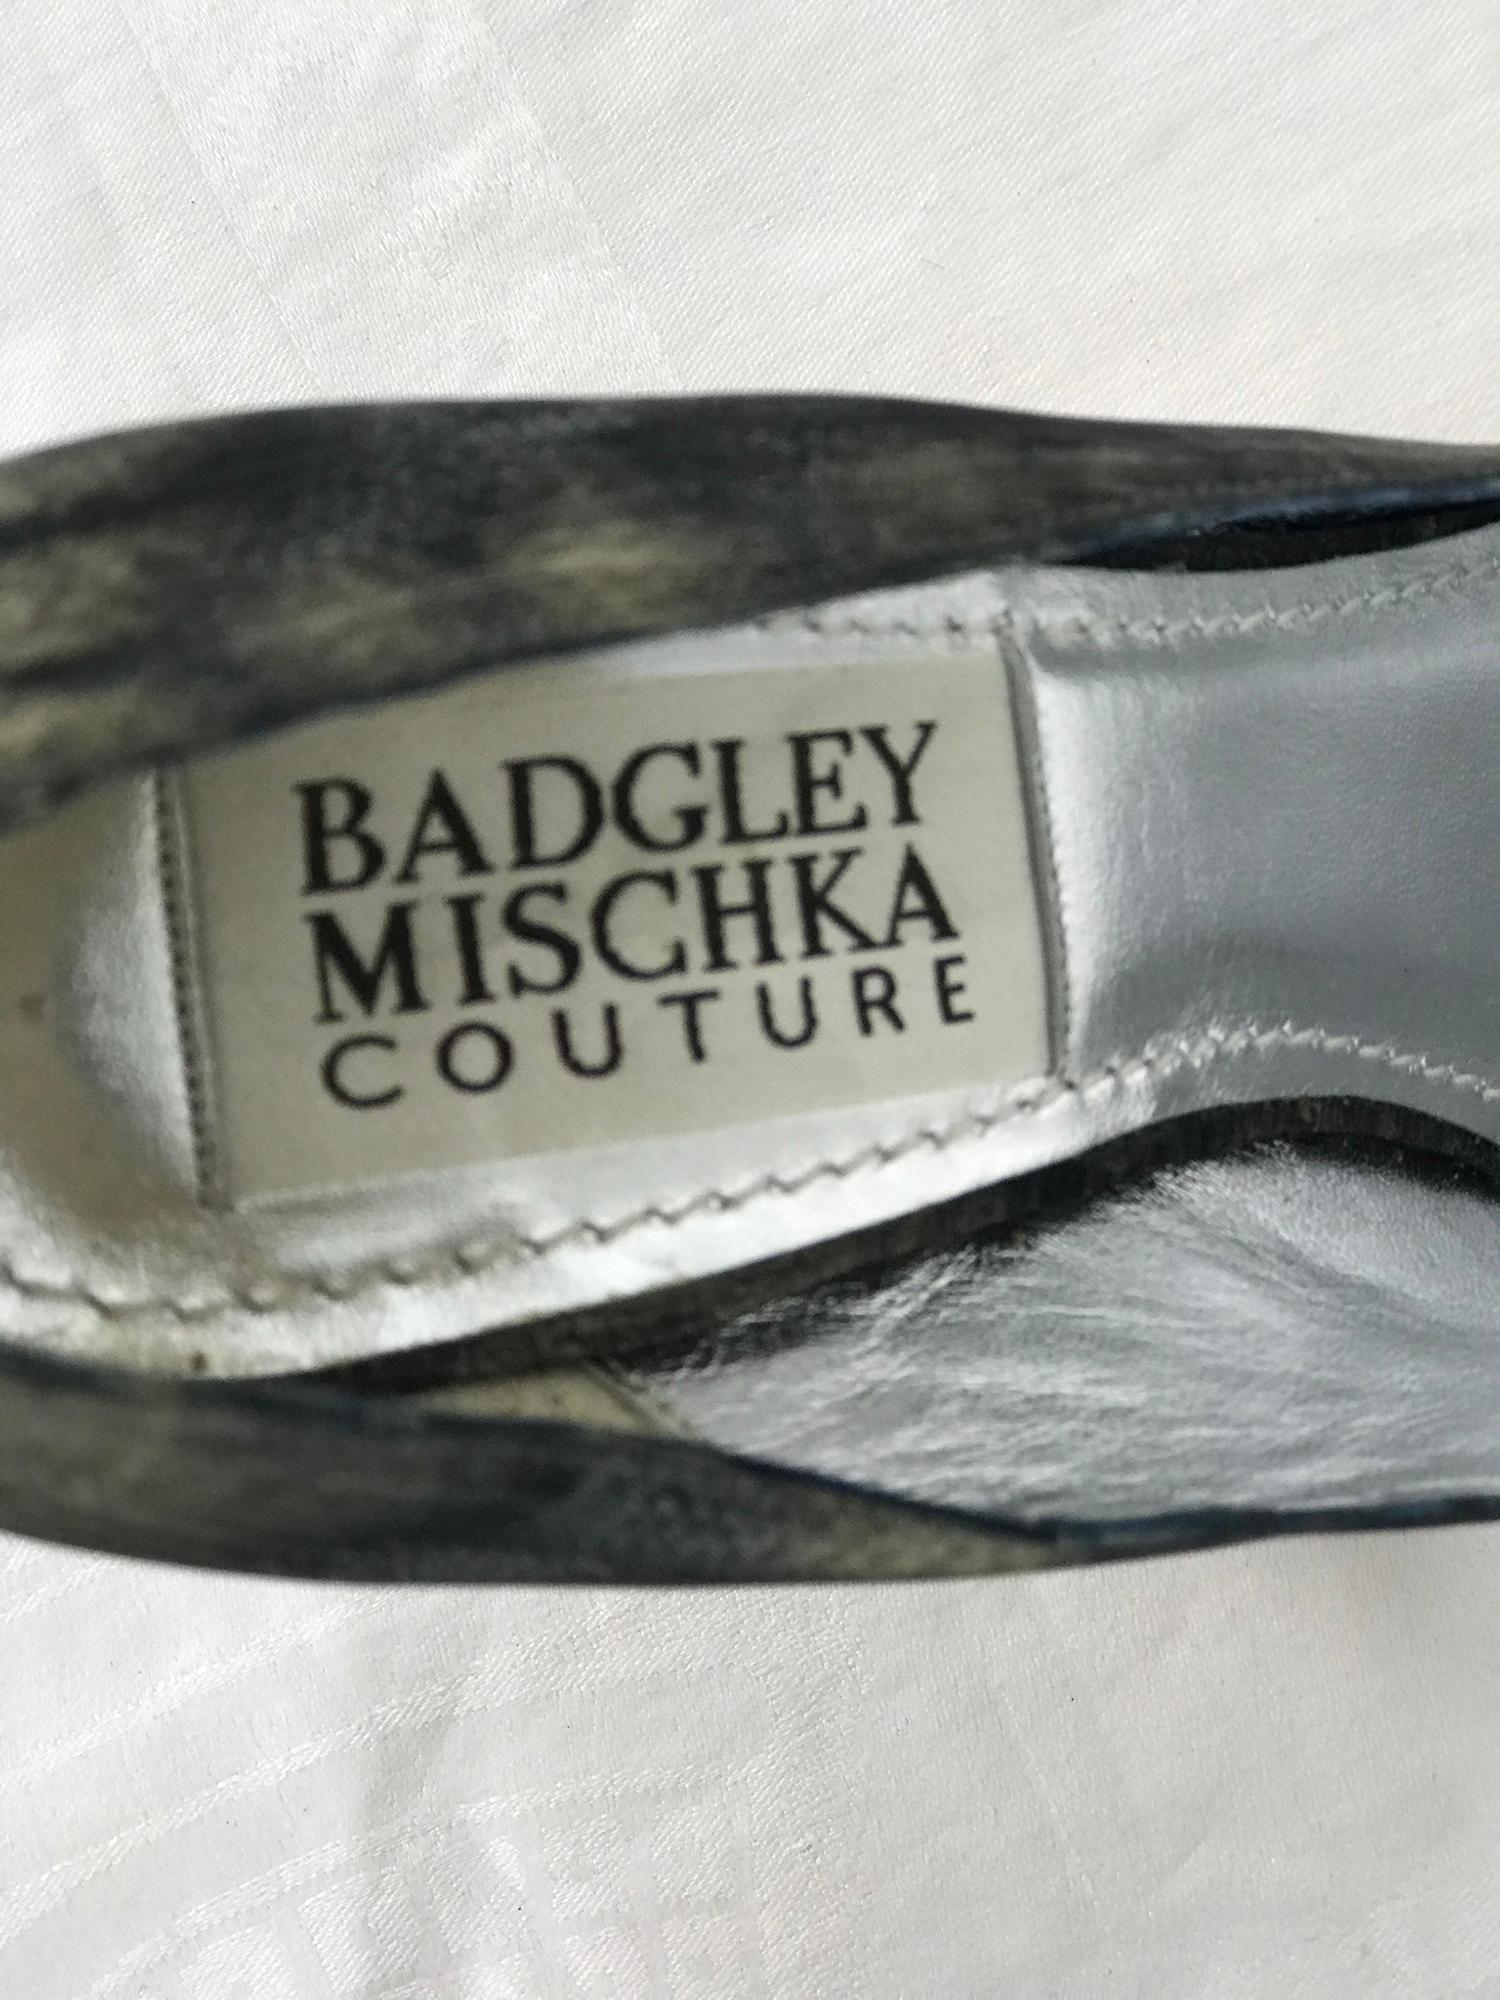 Badgley Mischka Couture Black Sunflower Fabric High Heel Pumps 6 1/2 In Excellent Condition For Sale In West Palm Beach, FL